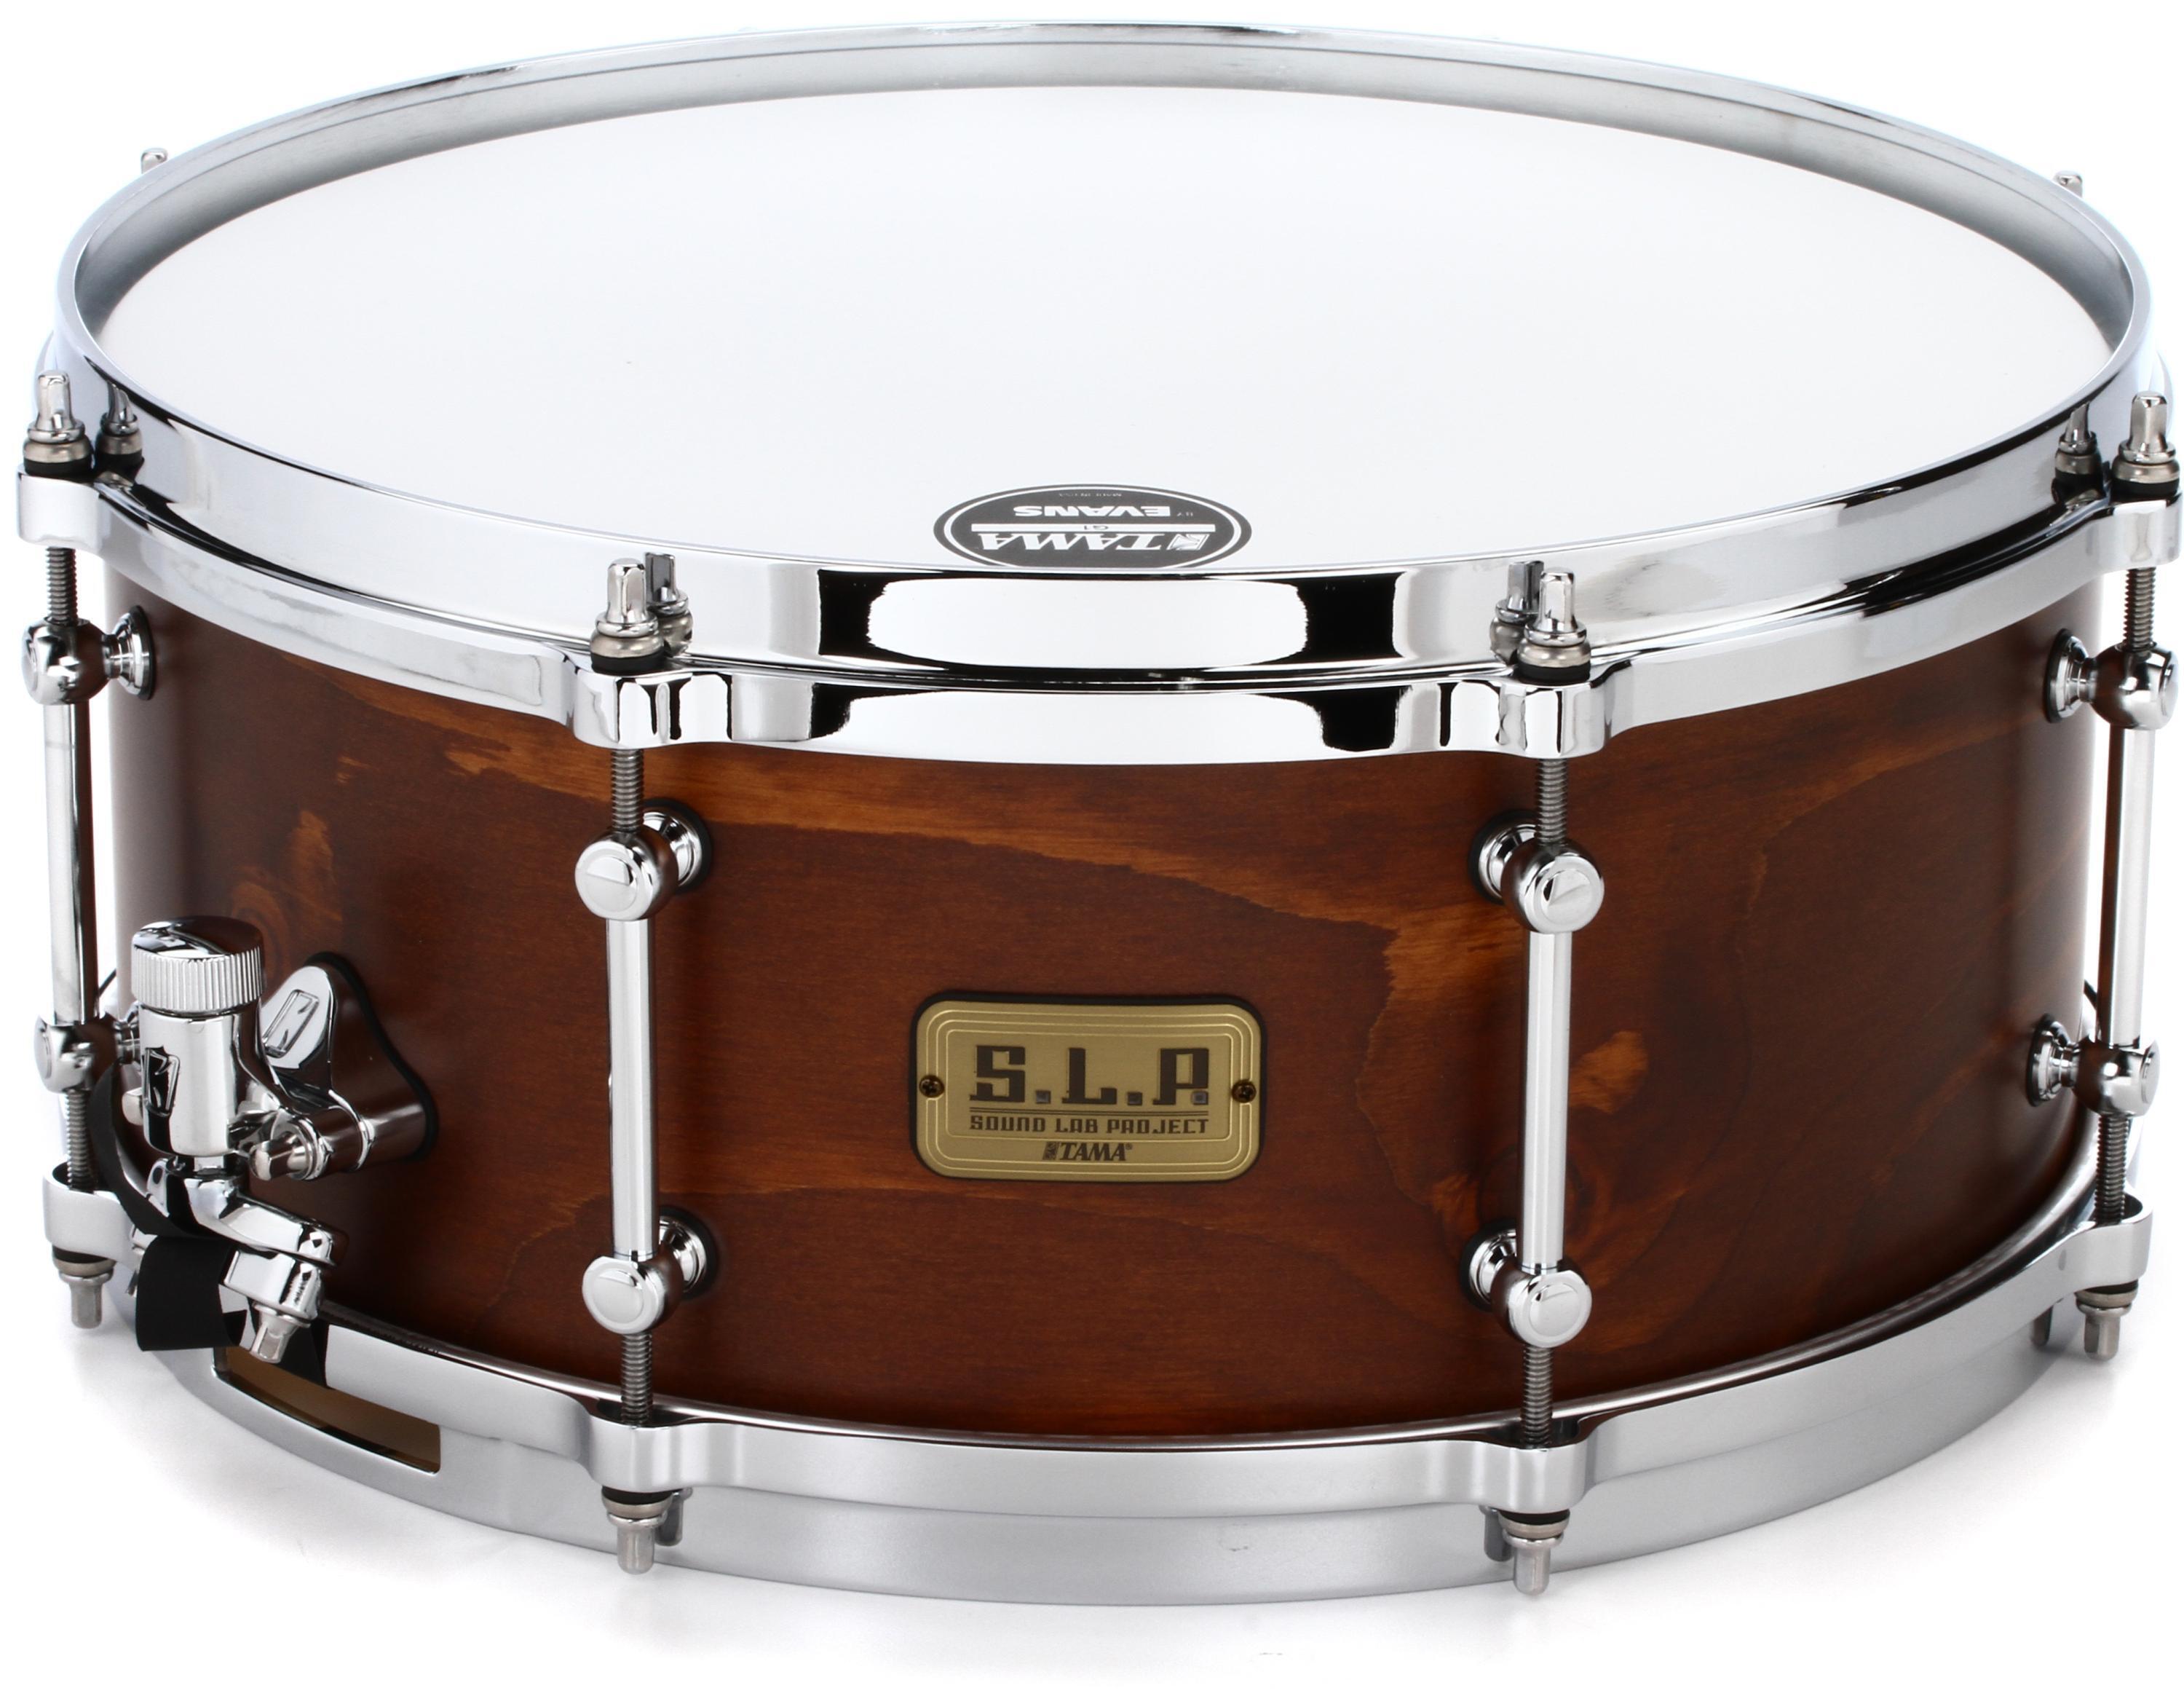 Tama S.L.P. Fat Spruce Snare Drum - 6 x 14 inch | Sweetwater